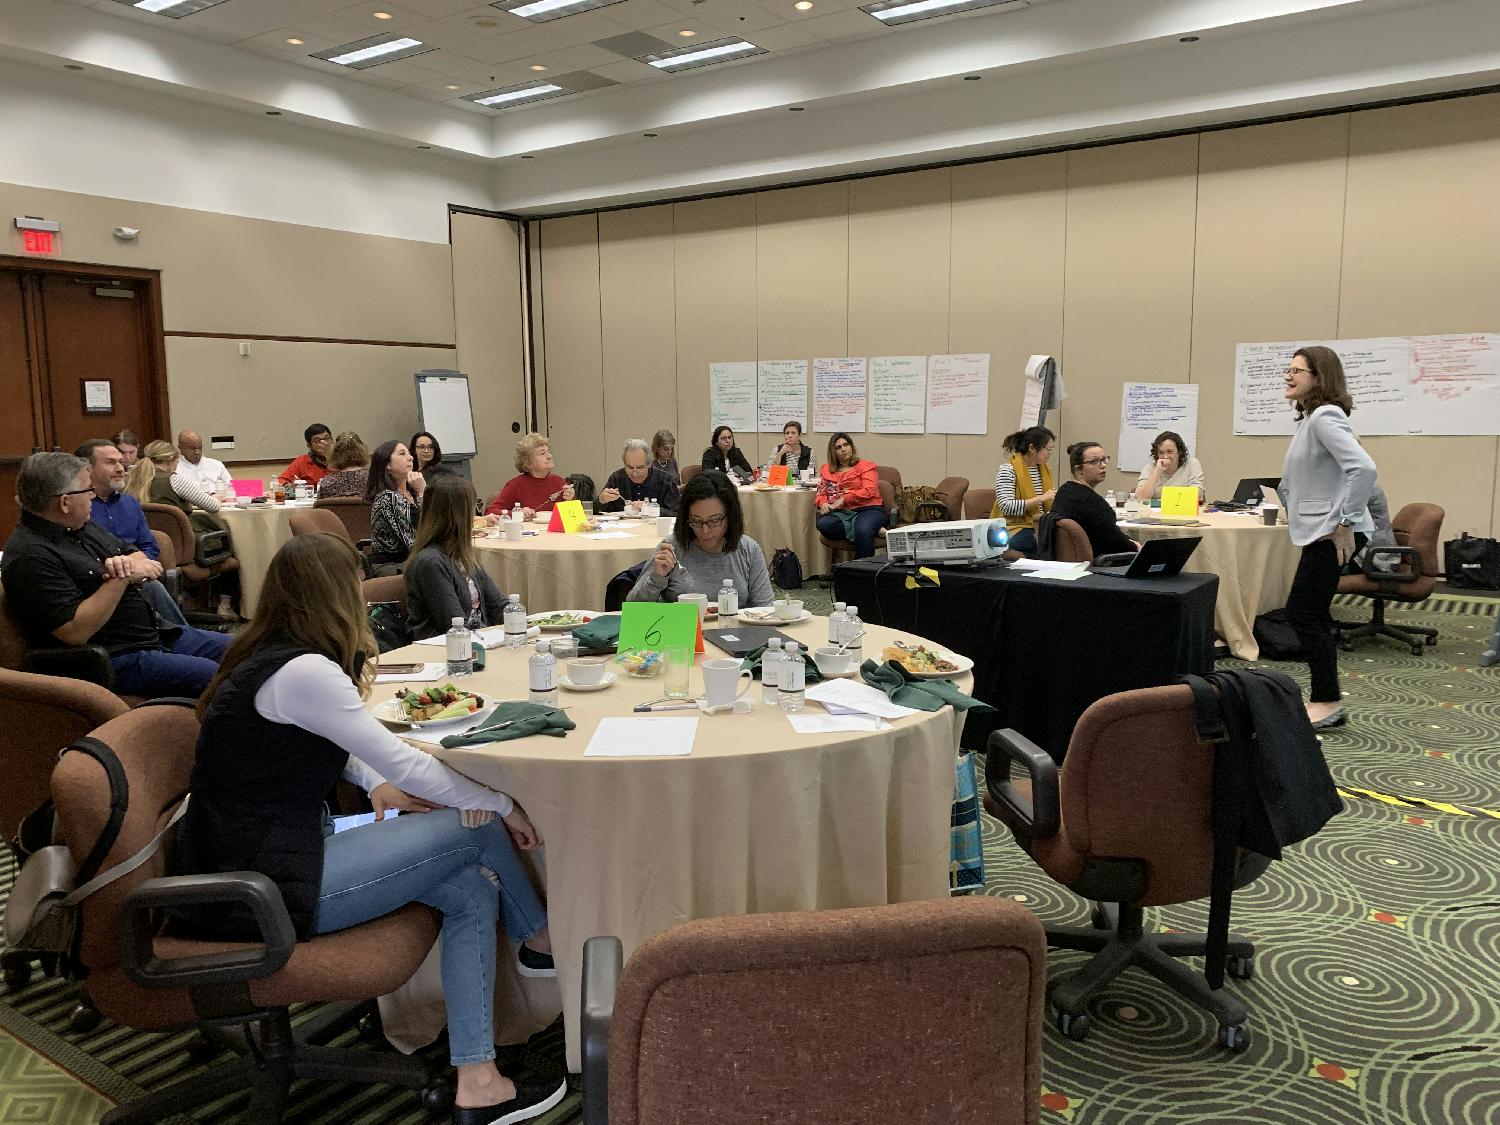 The futureAlign 2019-2020 Team shares best practices and workshops at the annual offsite event in The Woodlands, Texas.